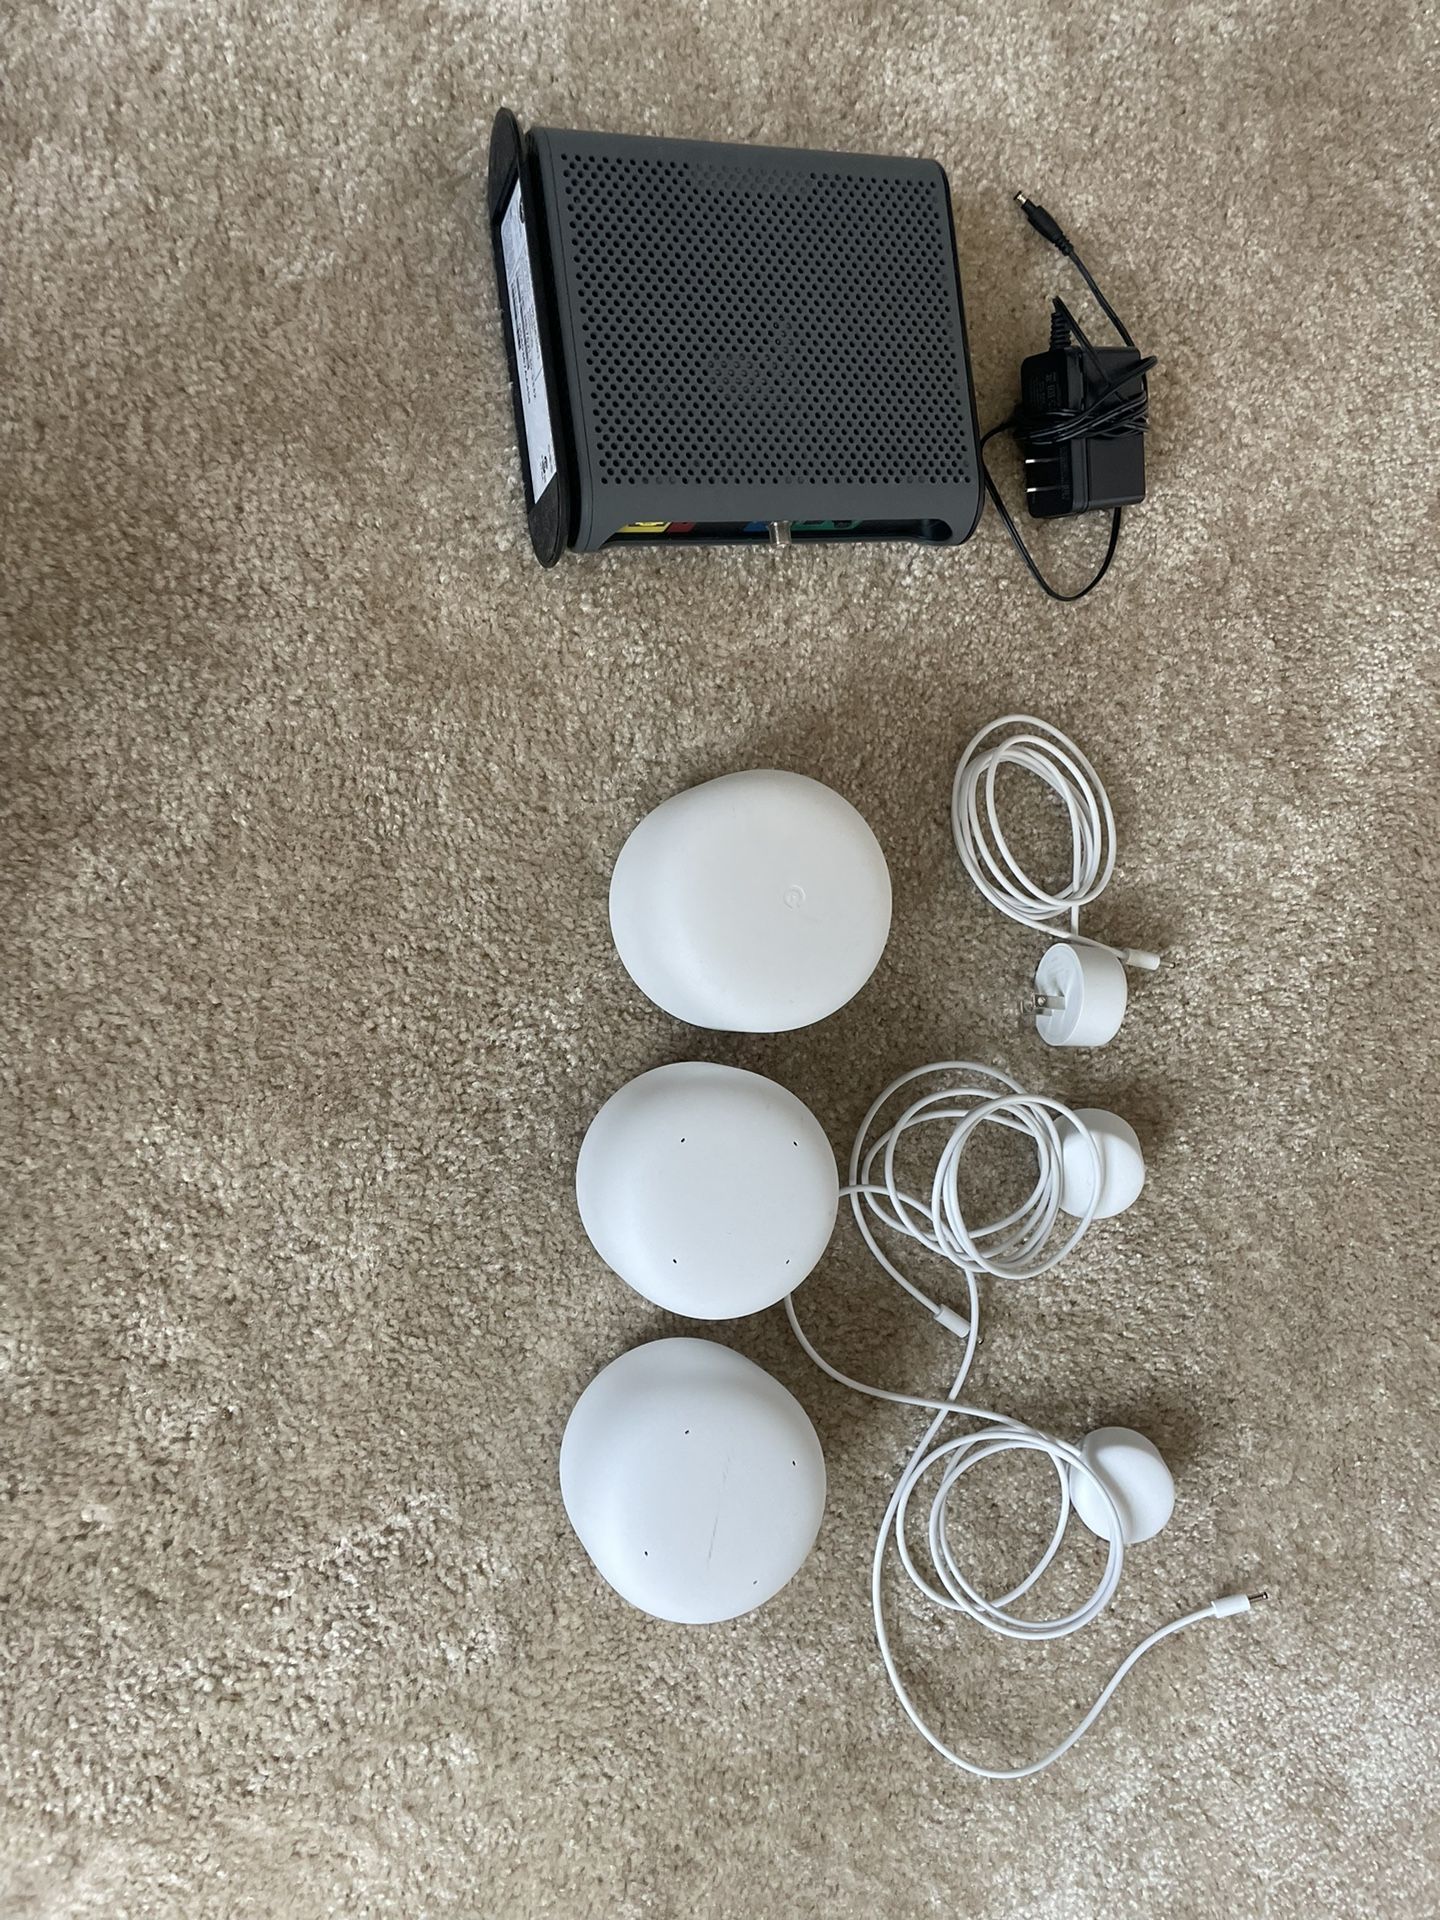 Nest WiFi Router And two Points